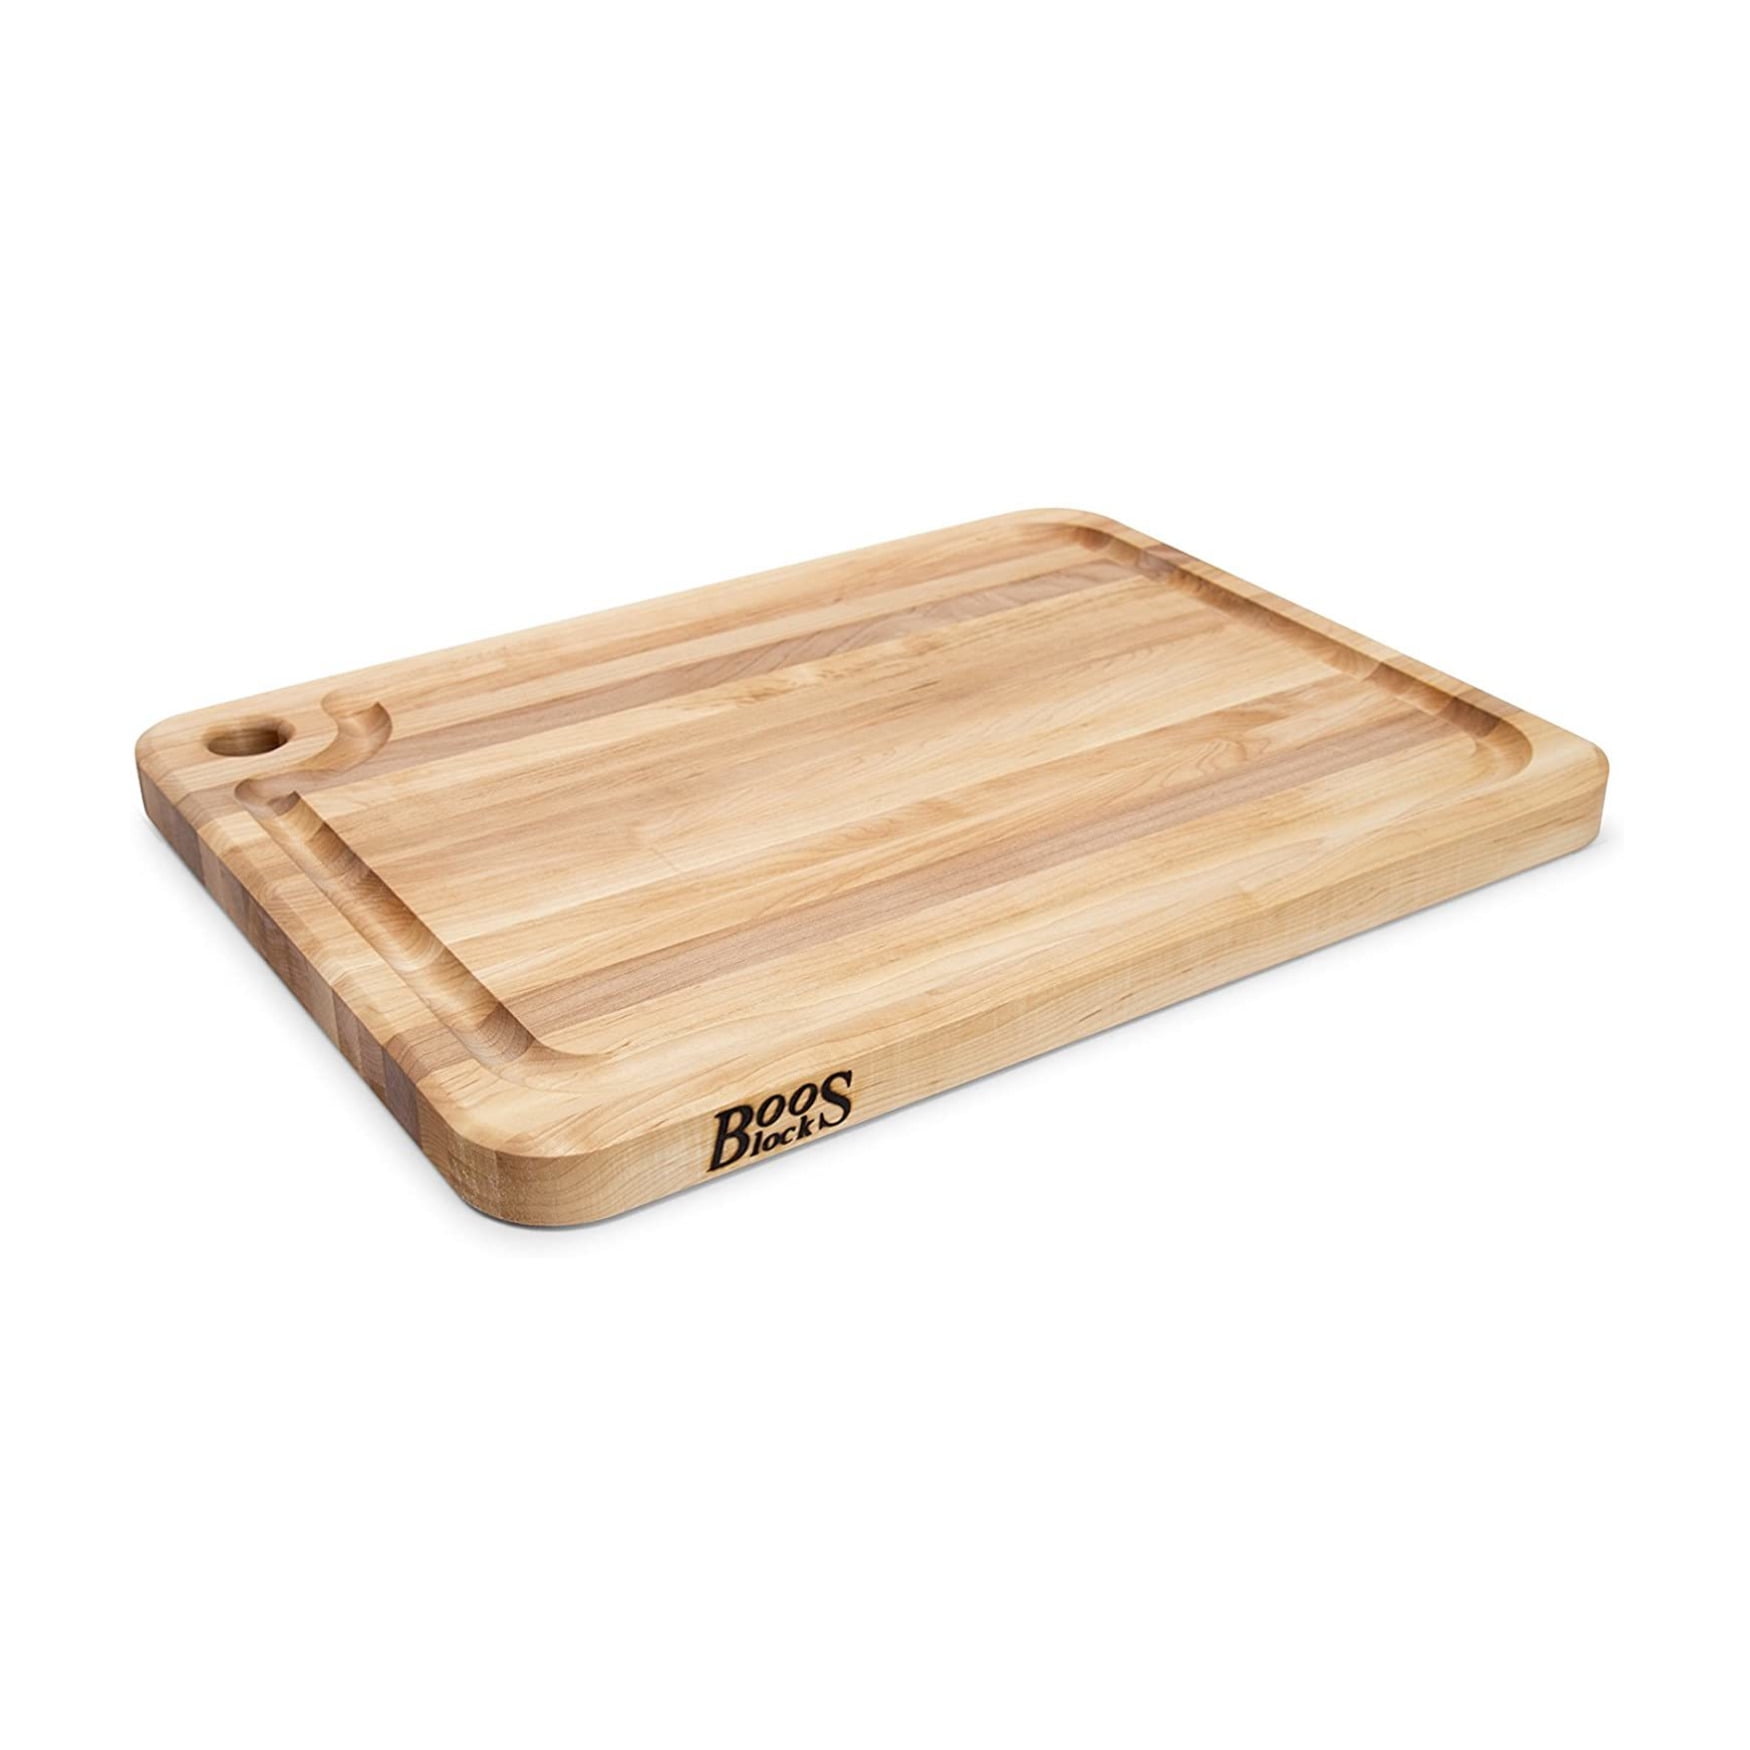 John Boos Reversible Maple Wood Cutting Board with Groove 20 x 14 x 1.5 Inch 